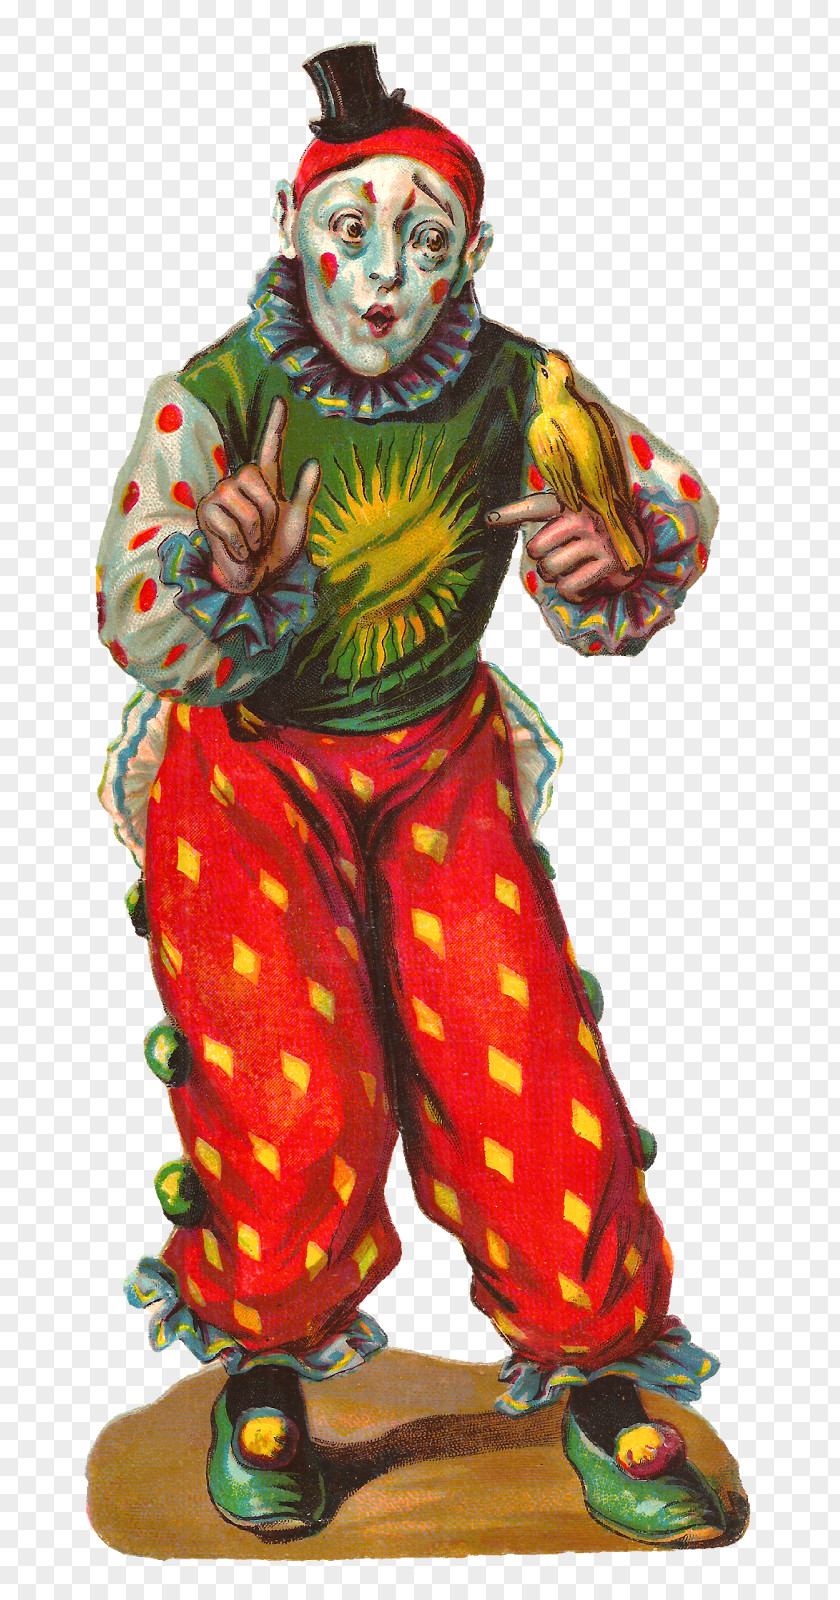 Circus Clown The Starring Britney Spears Harlequin PNG